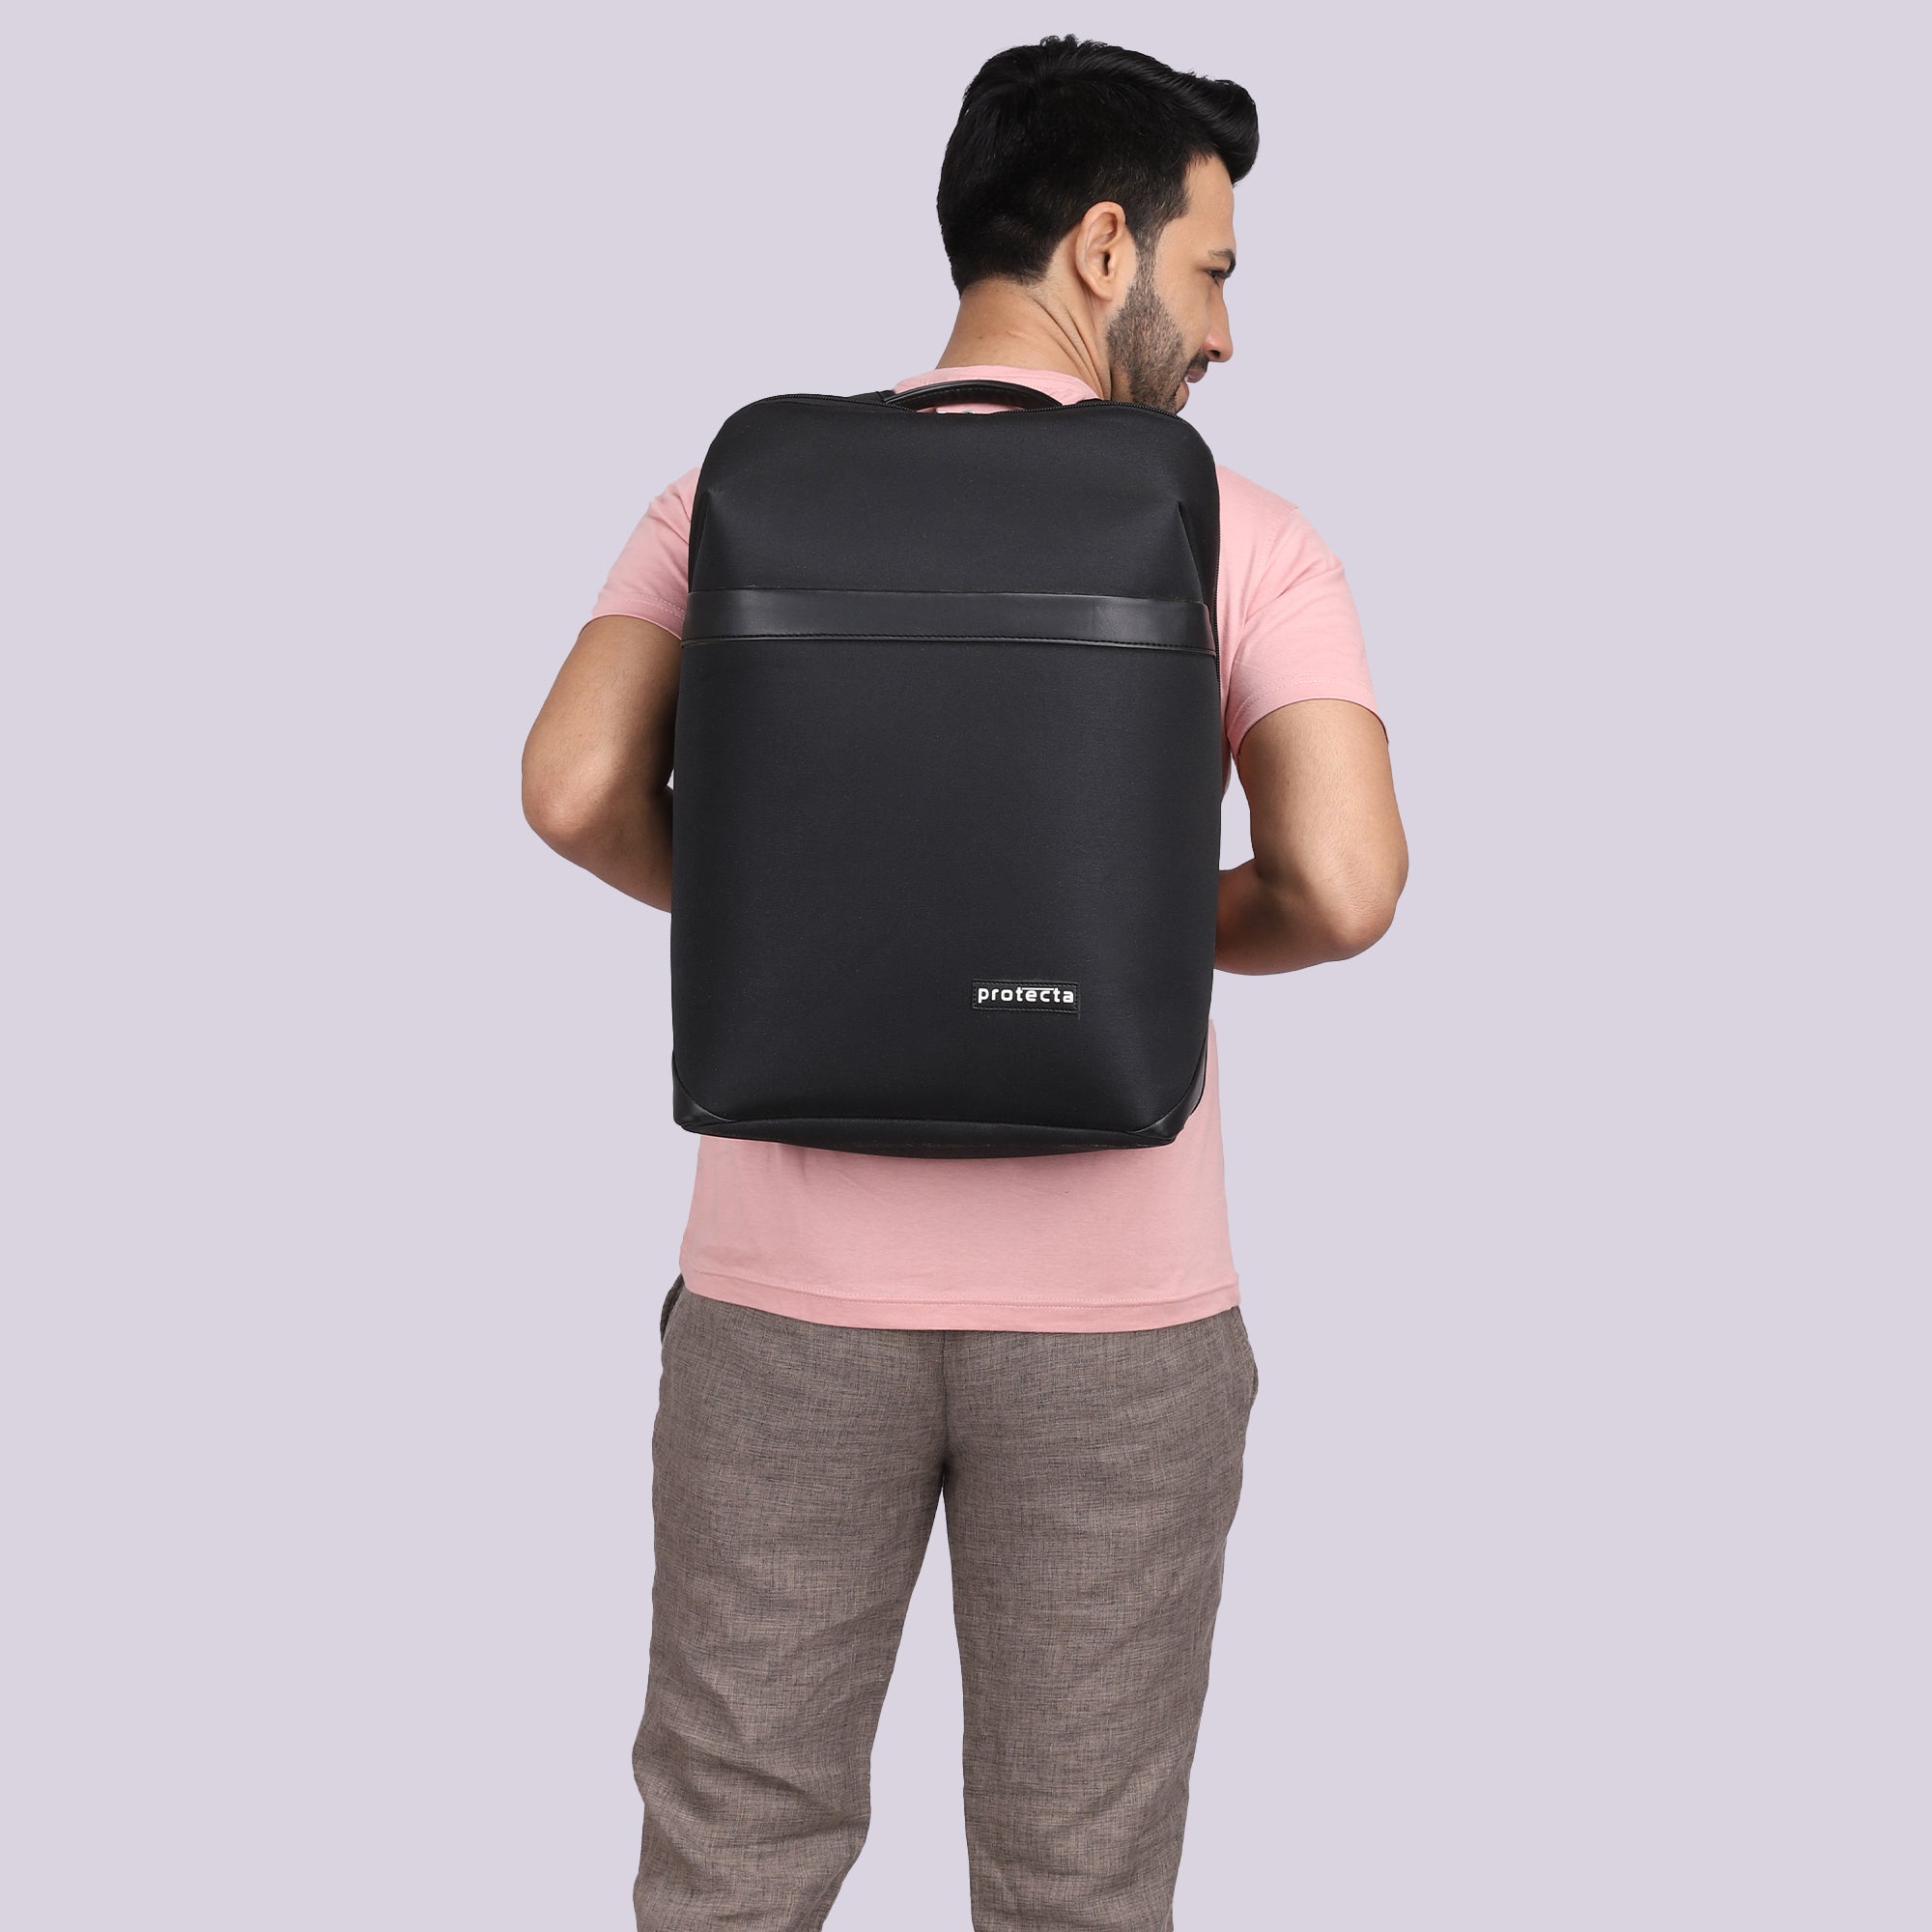 Black | Protecta Early Lead Anti-Theft Office Laptop Backpack - 6